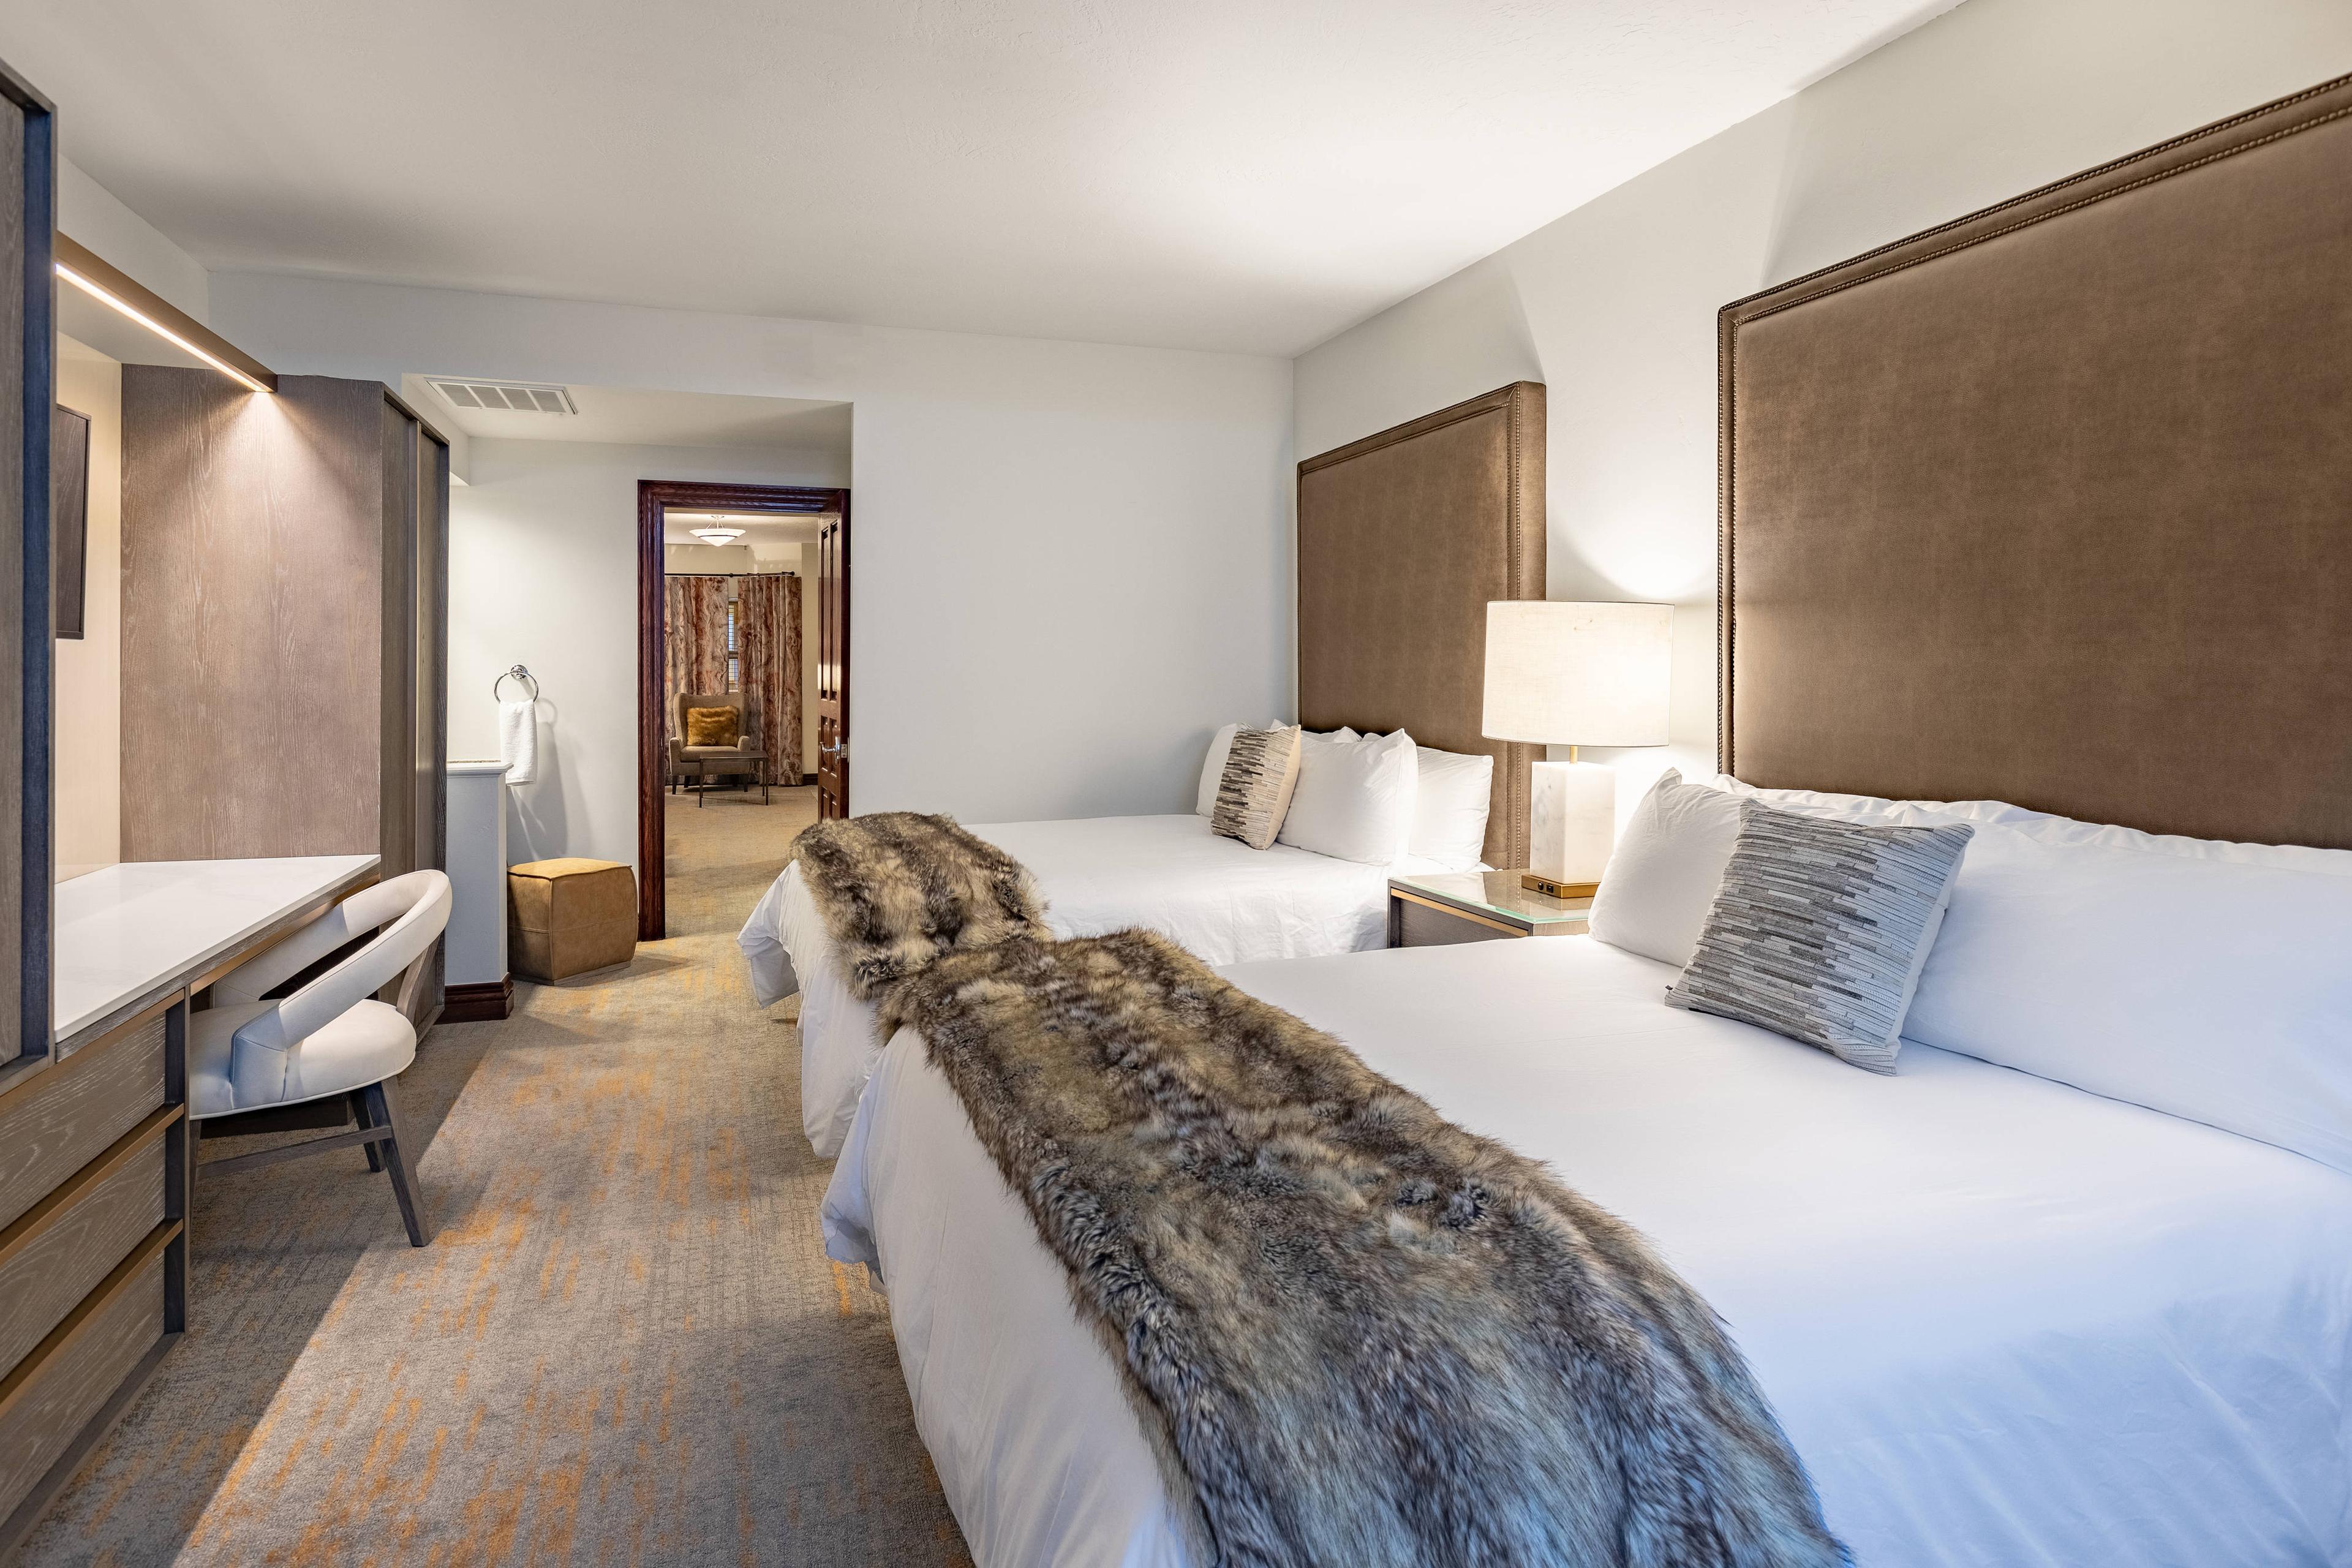 You will experience plenty of privacy in our queen suite with two separate rooms, separating bedroom from living space. These spacious accommodations make it easy to travel and vacation as a group.